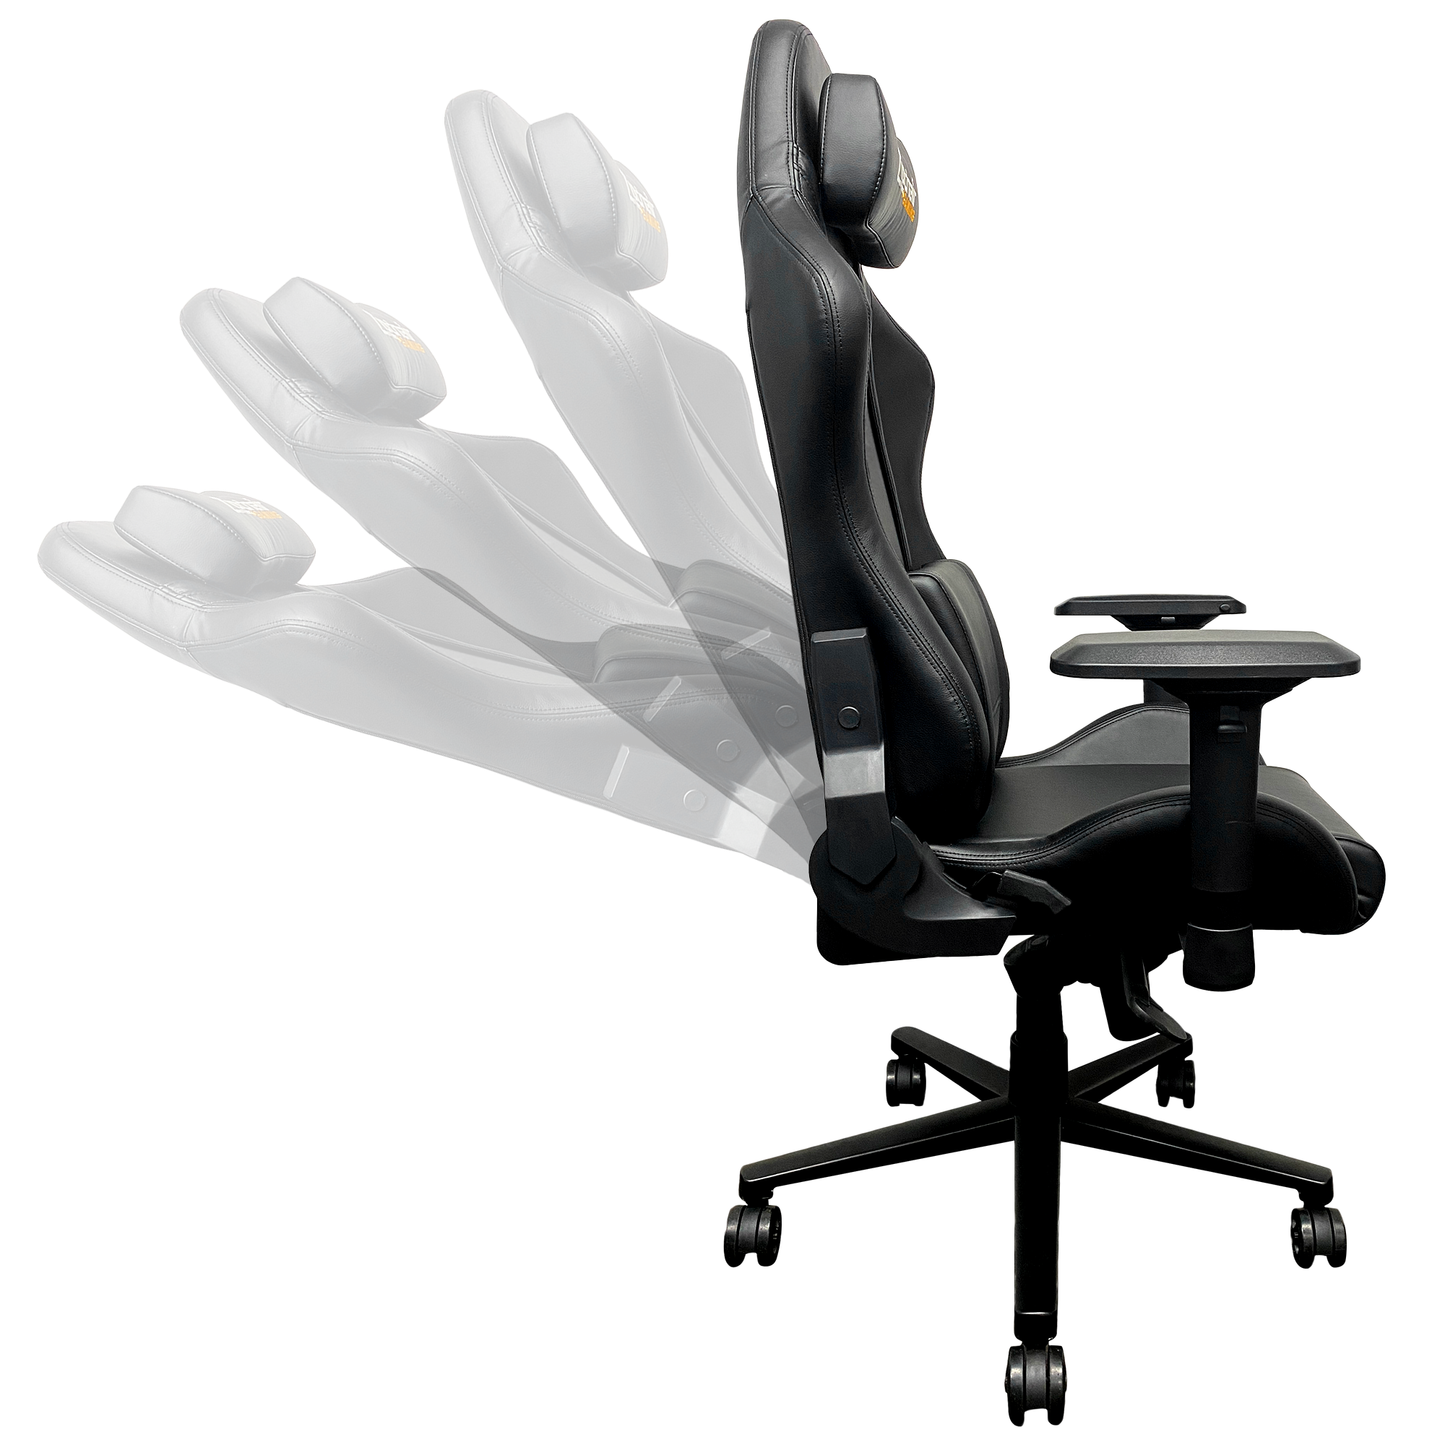 Xpression Pro Gaming Chair with American East Esports Conference Logo